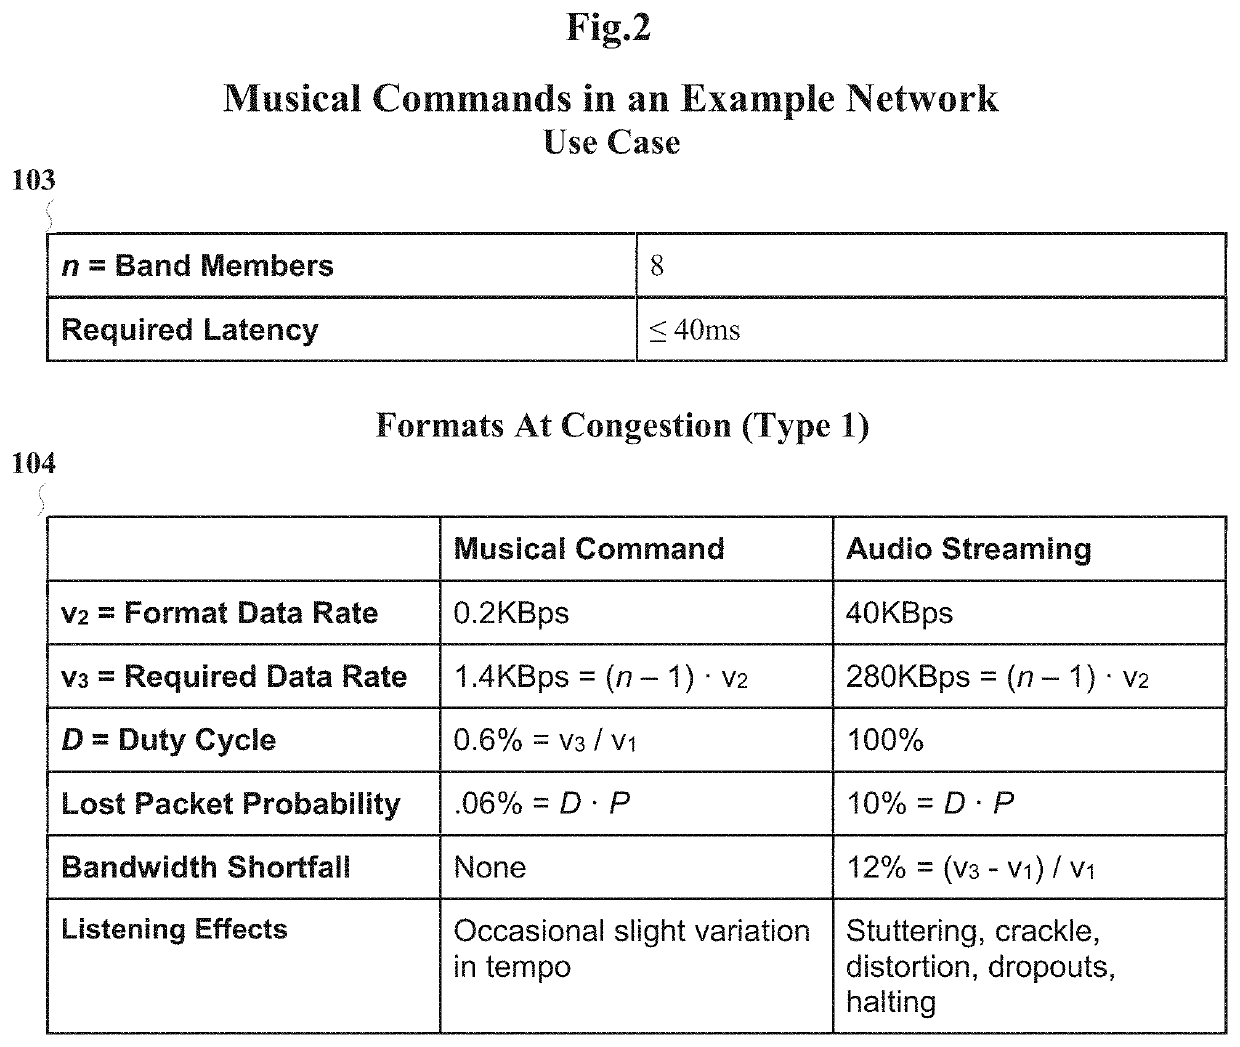 Live Broadcast Network Using Musical Encoding to Deliver Solo, Group or Collaborative Performances